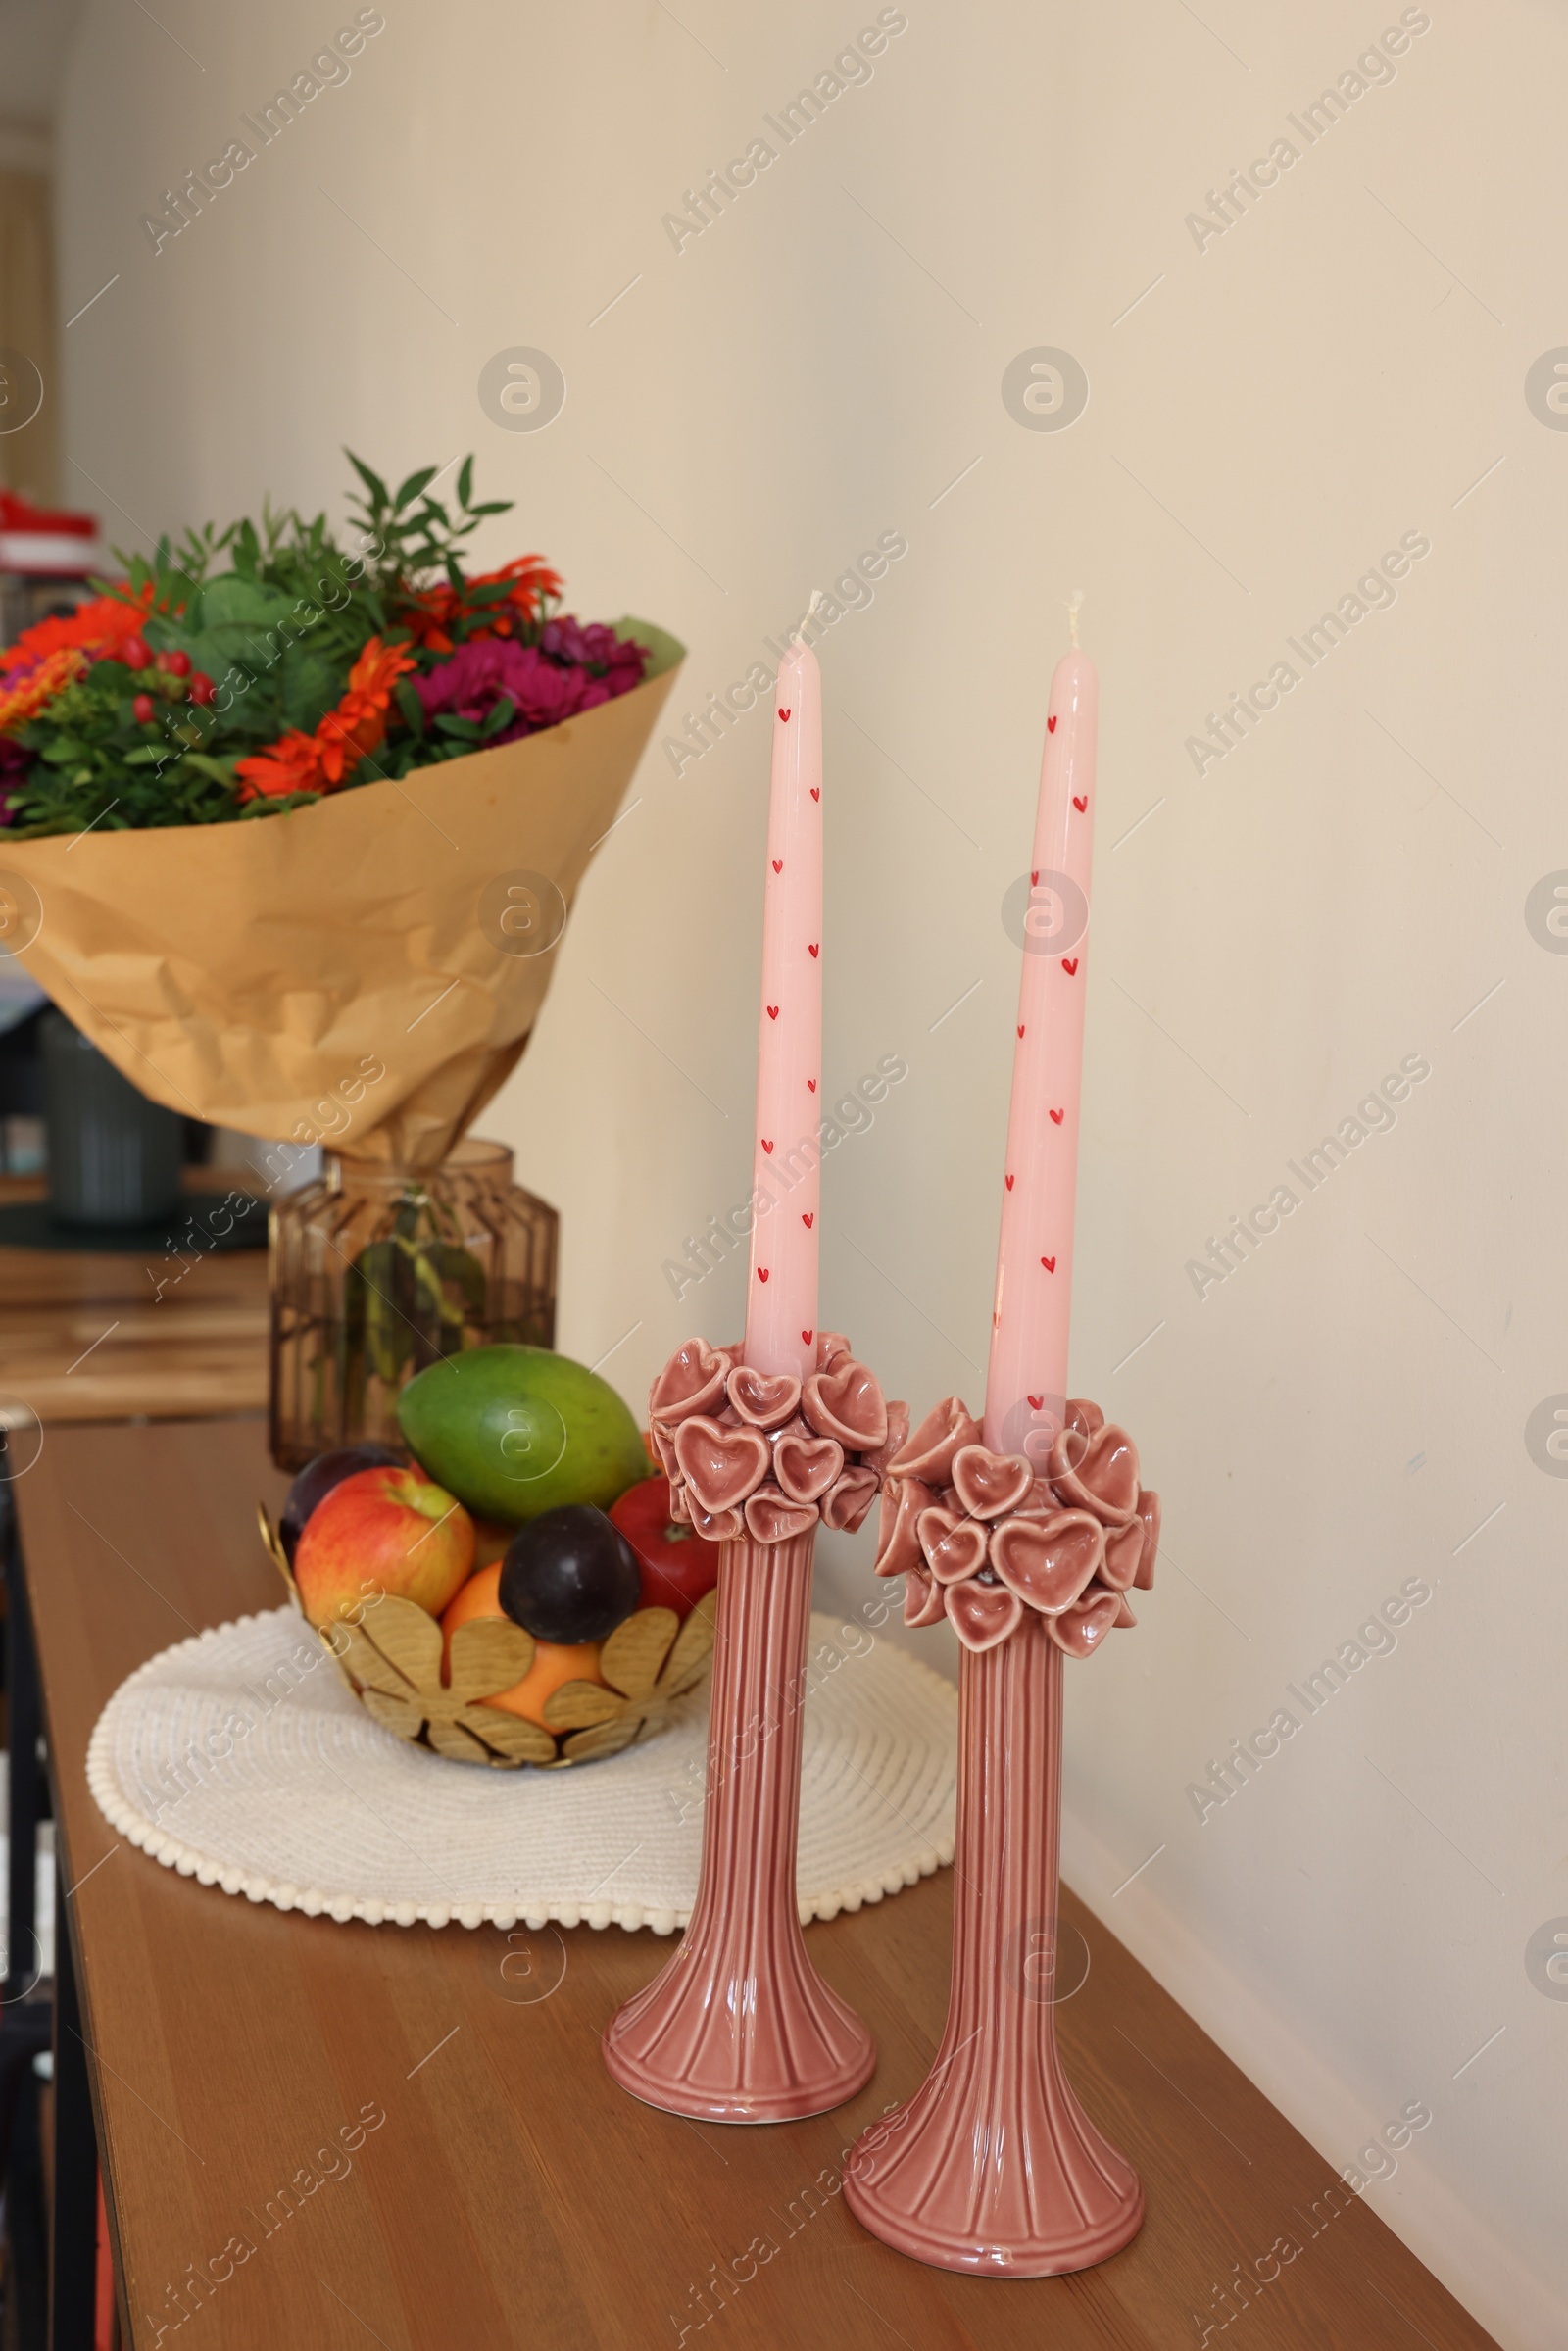 Photo of Bouquet of flowers, bowl with fresh fruits and candles on wooden table near white wall